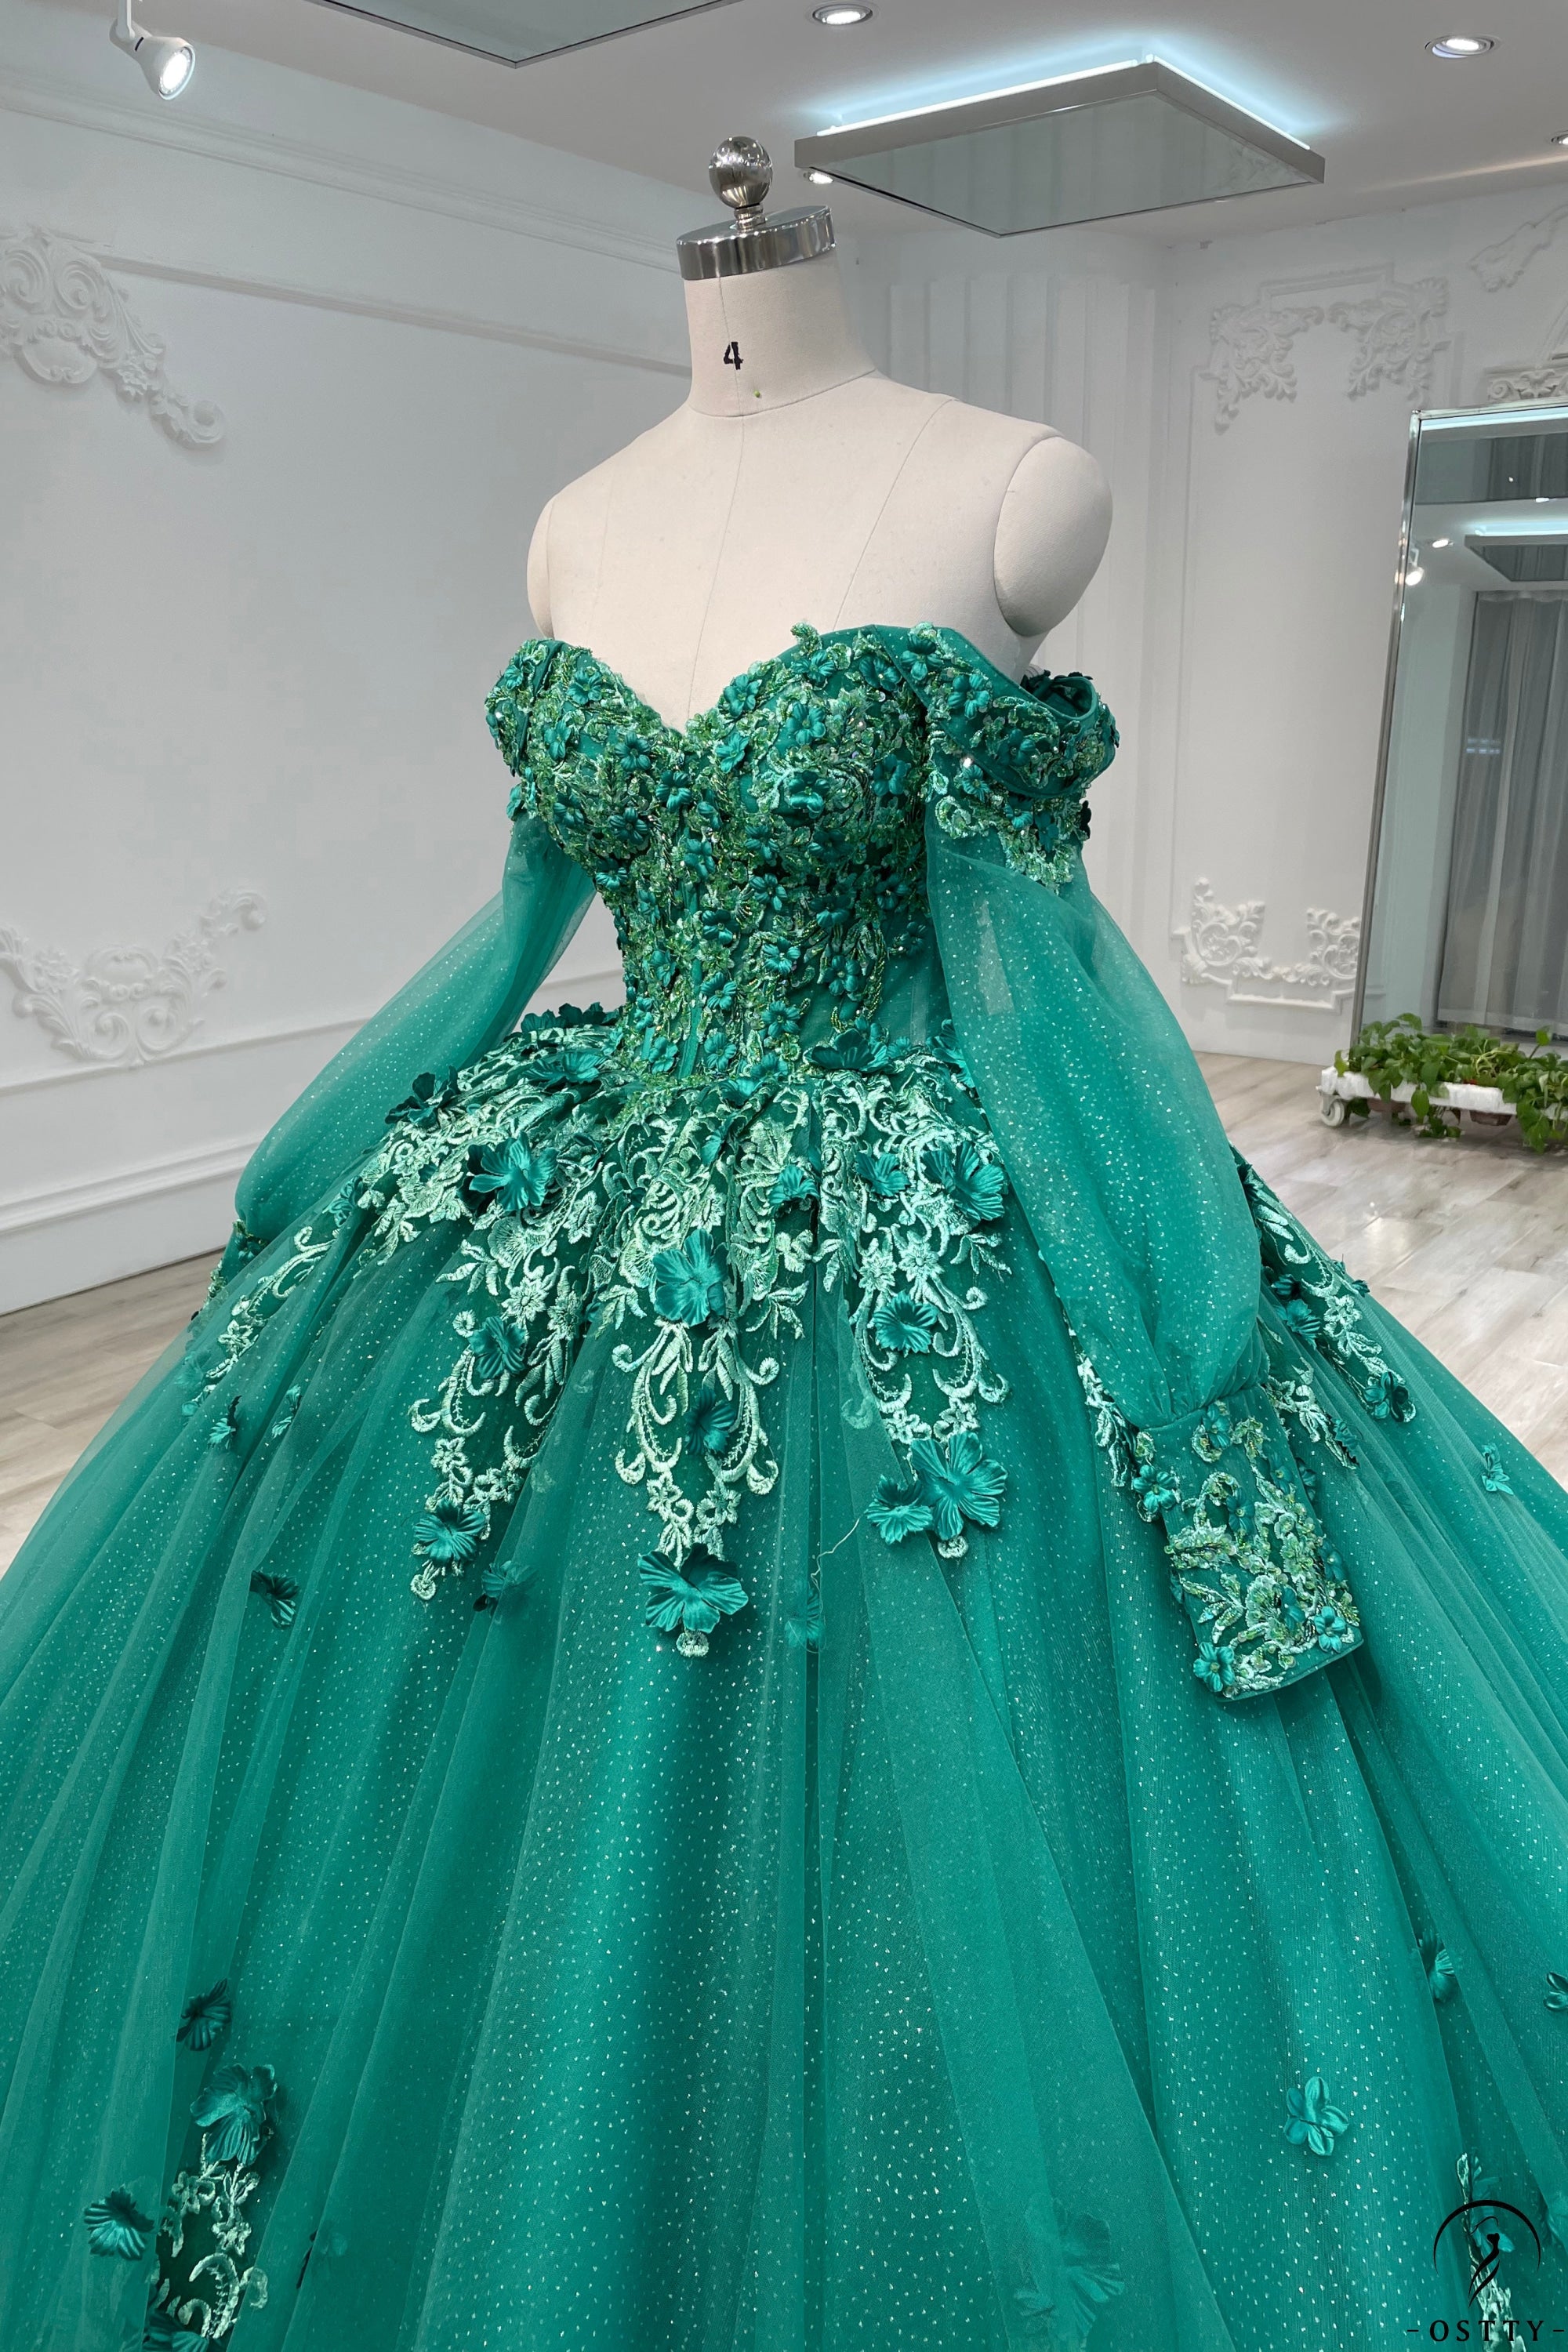 Green Cape Long Sleeves Quinceanera Dress OS747 - Bridal Party Dresses $899.99